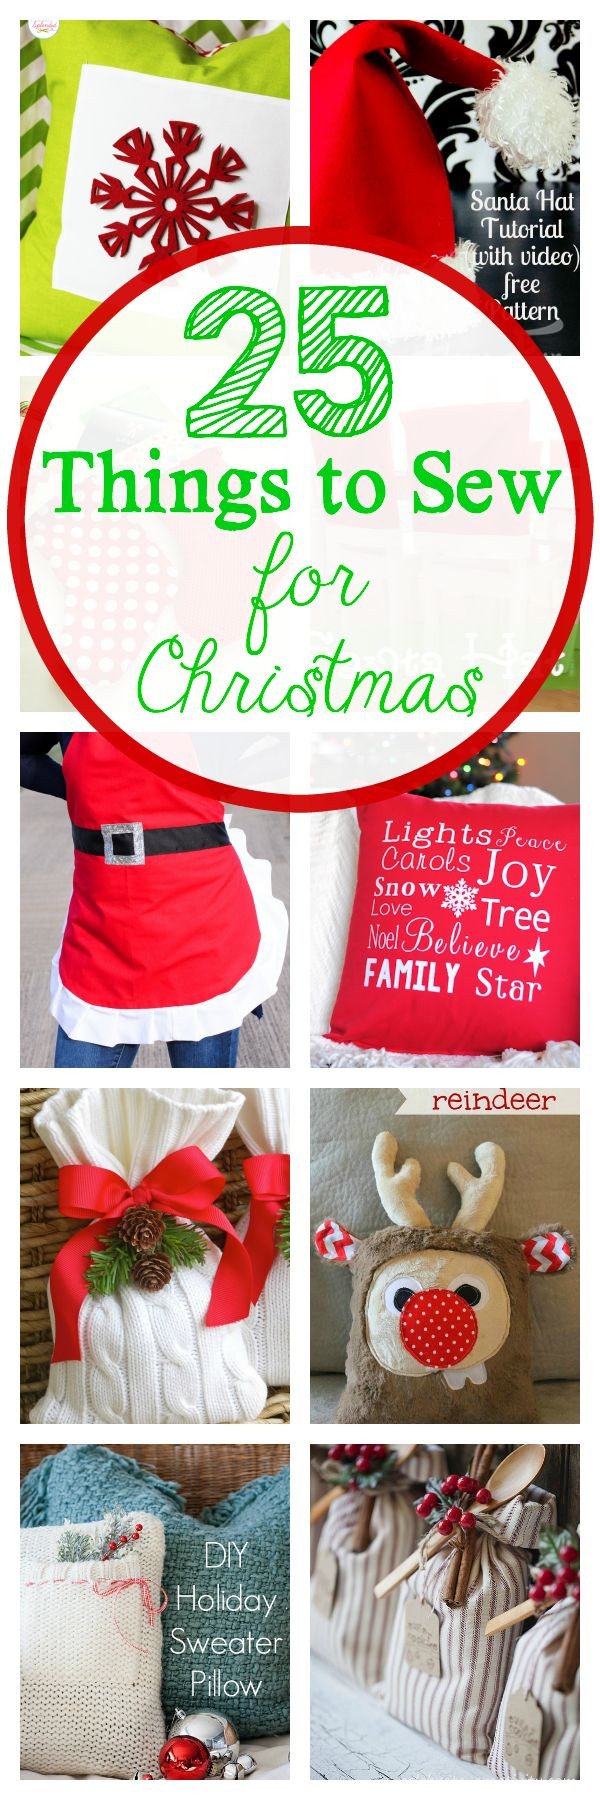 25 great things to sew for Christmas from stocking...